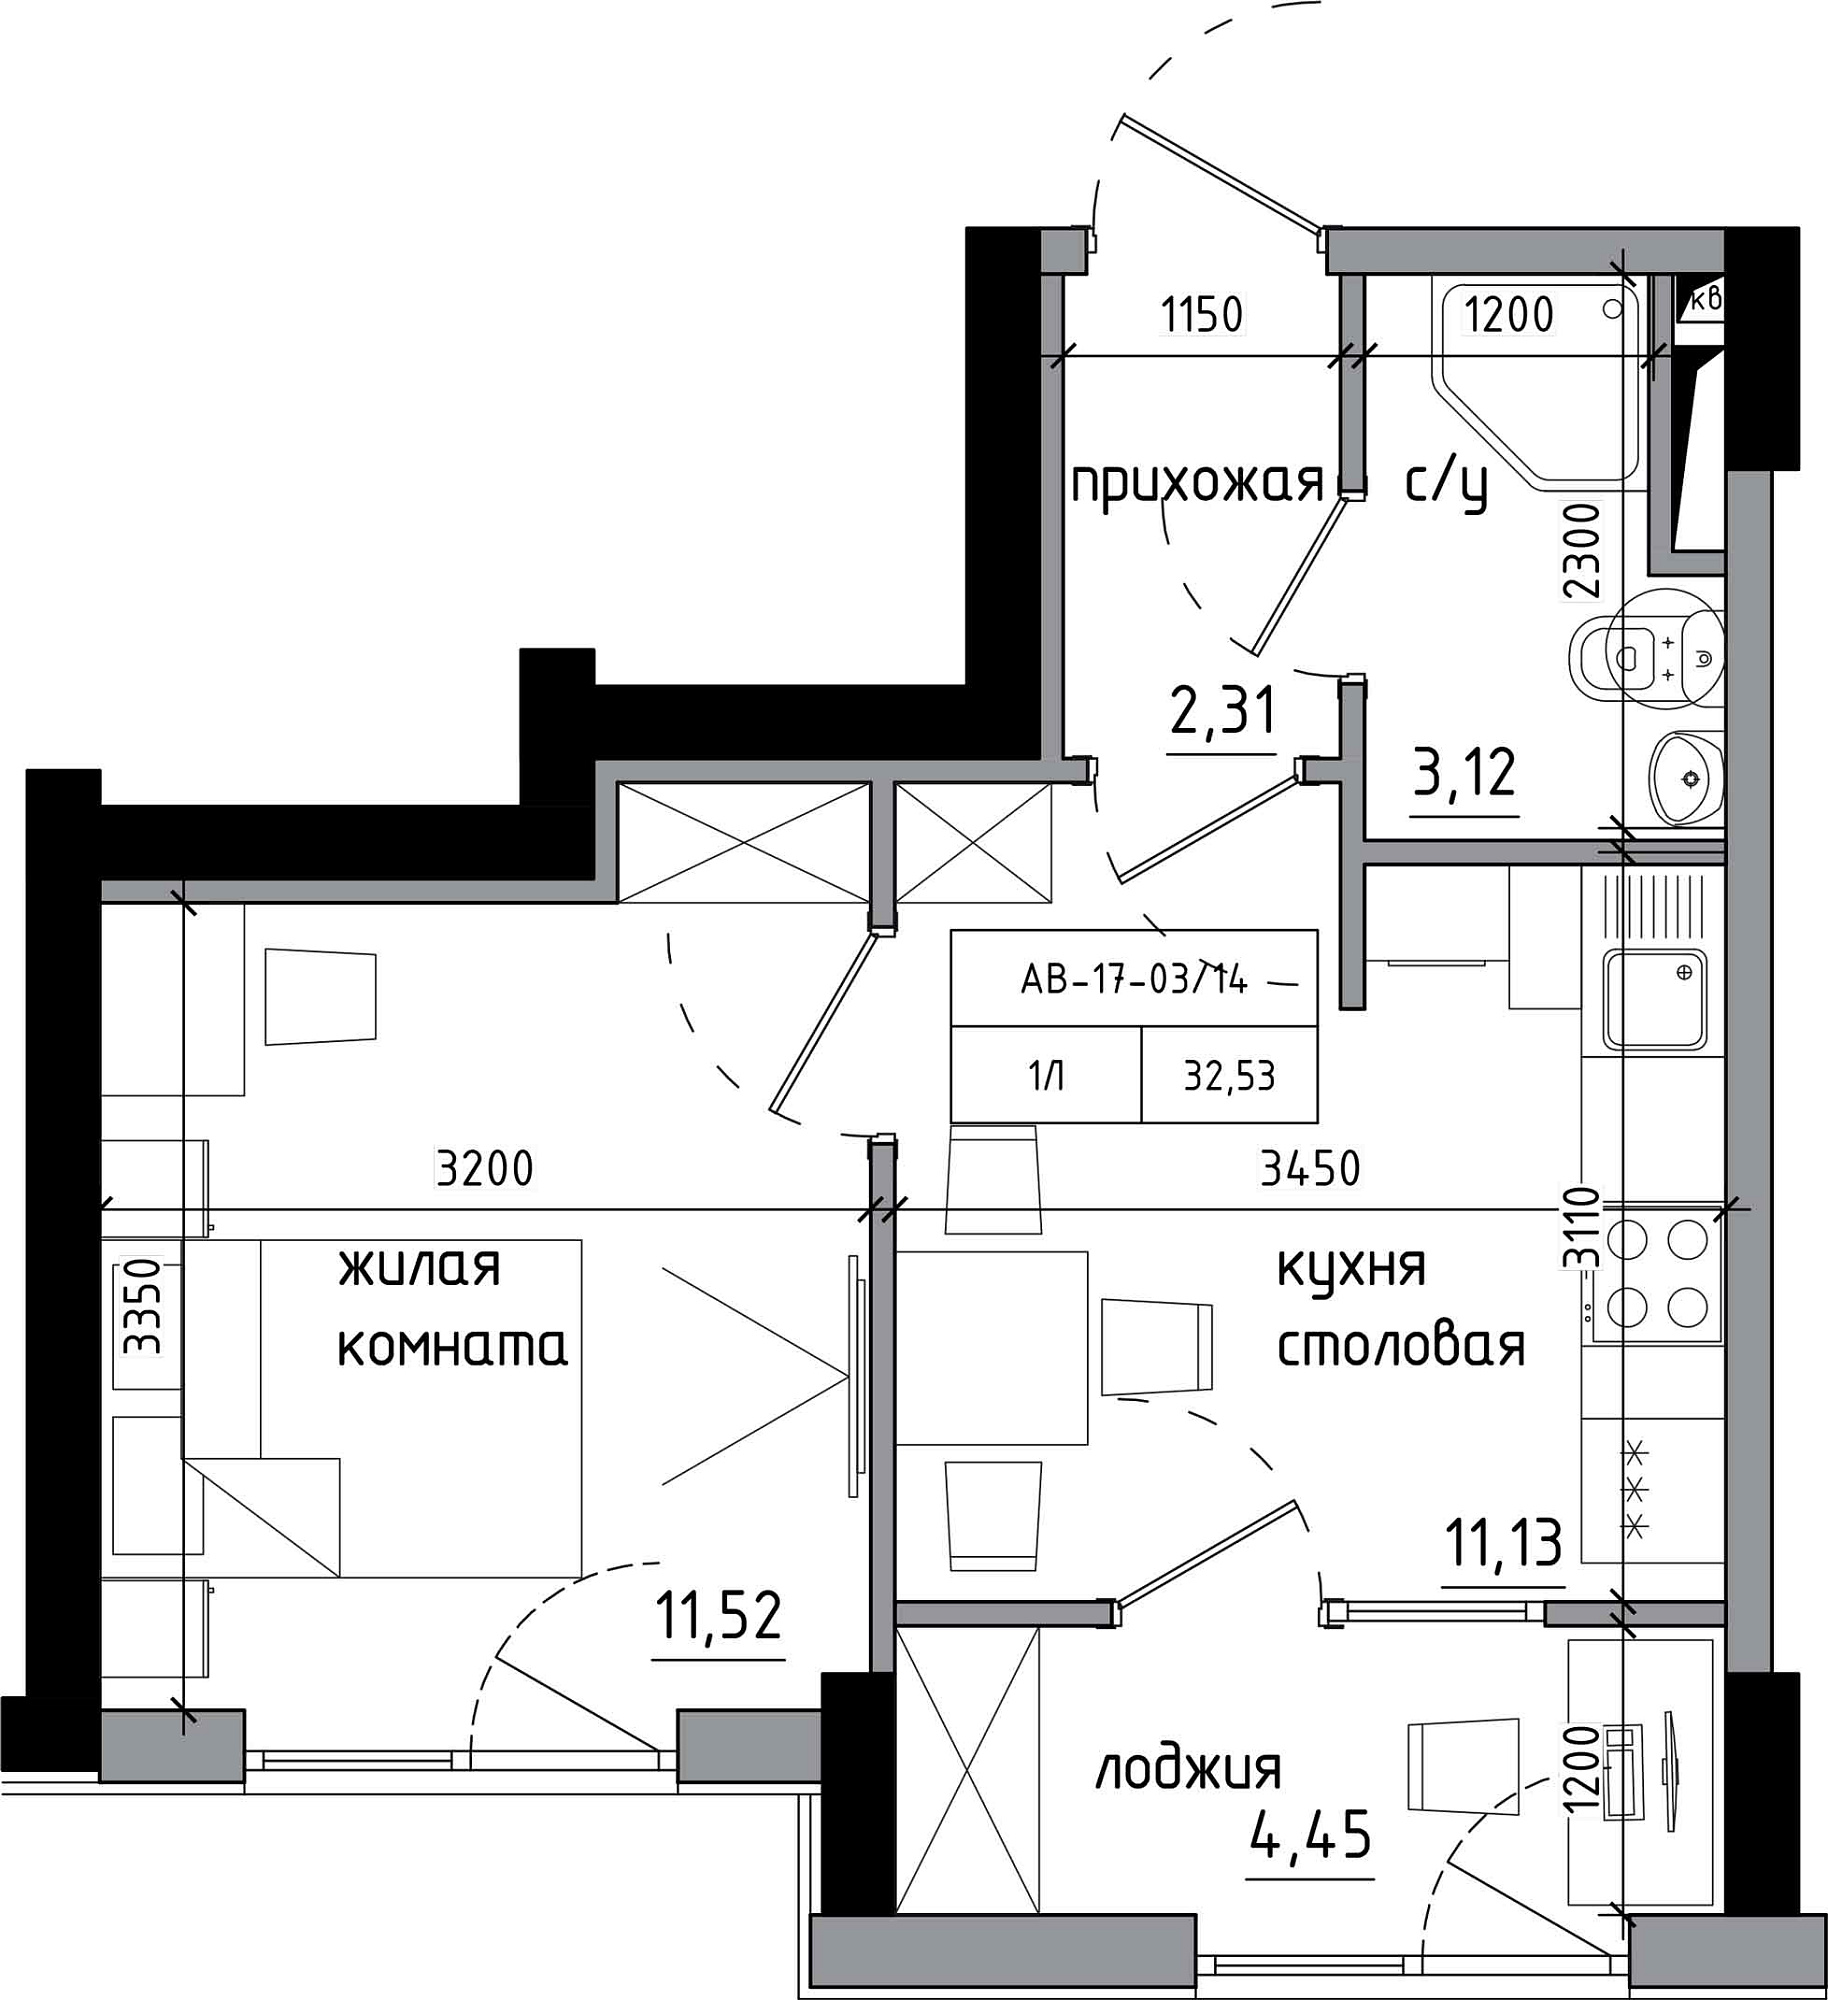 Planning 1-rm flats area 32.53m2, AB-17-03/00014.